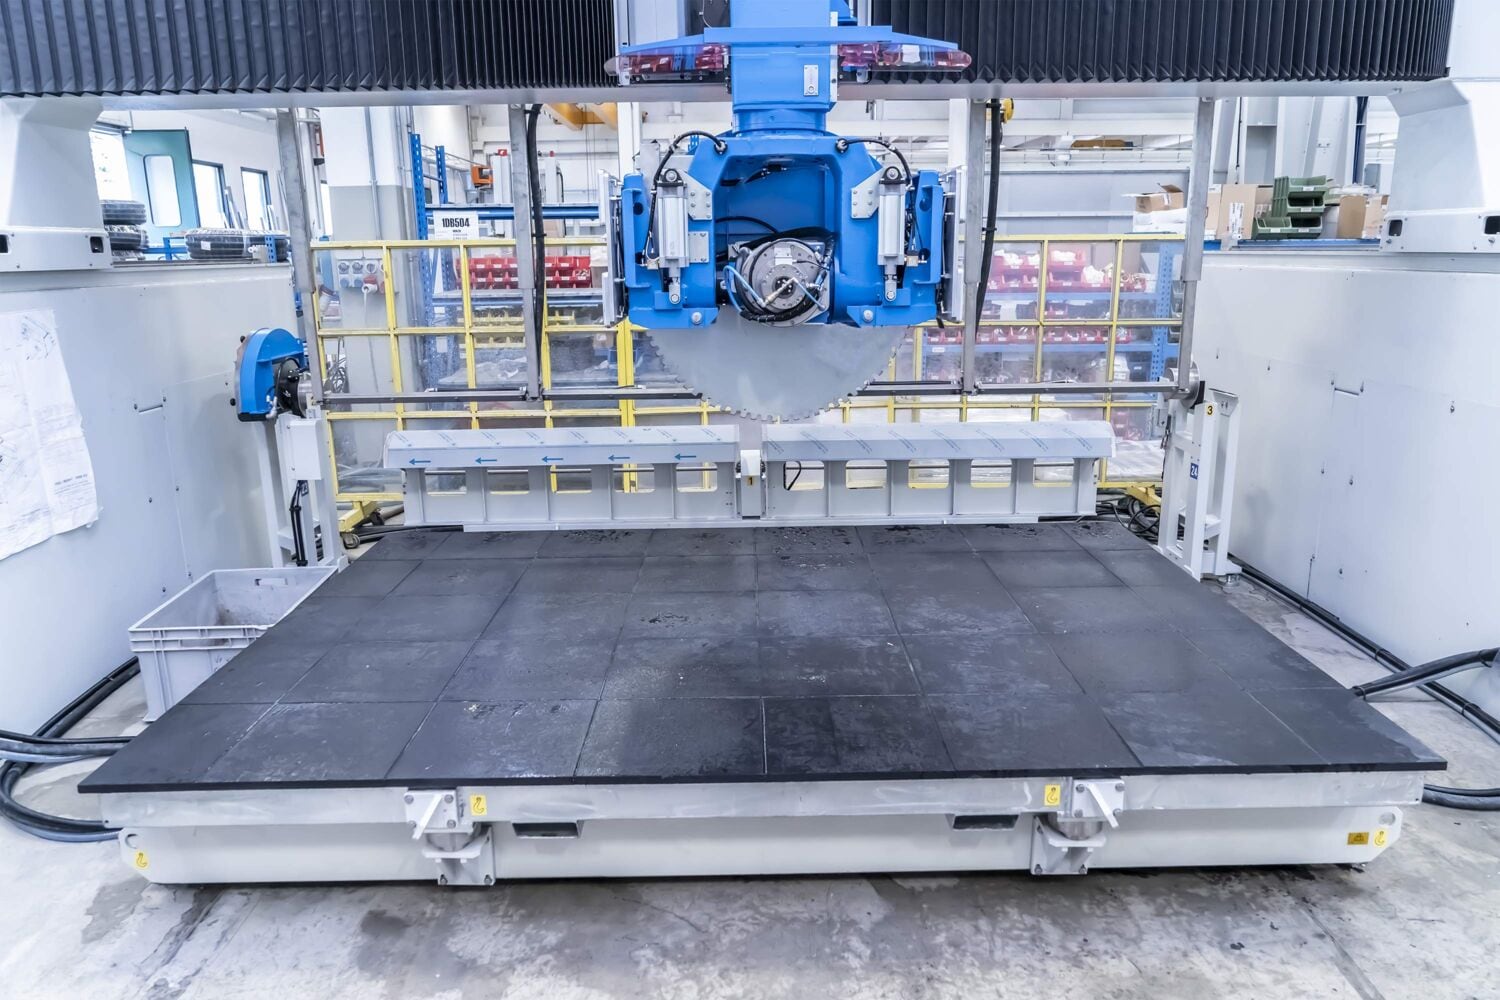 Convert a machining center into a Bridge Saw? You can with Cms Stone Technology!